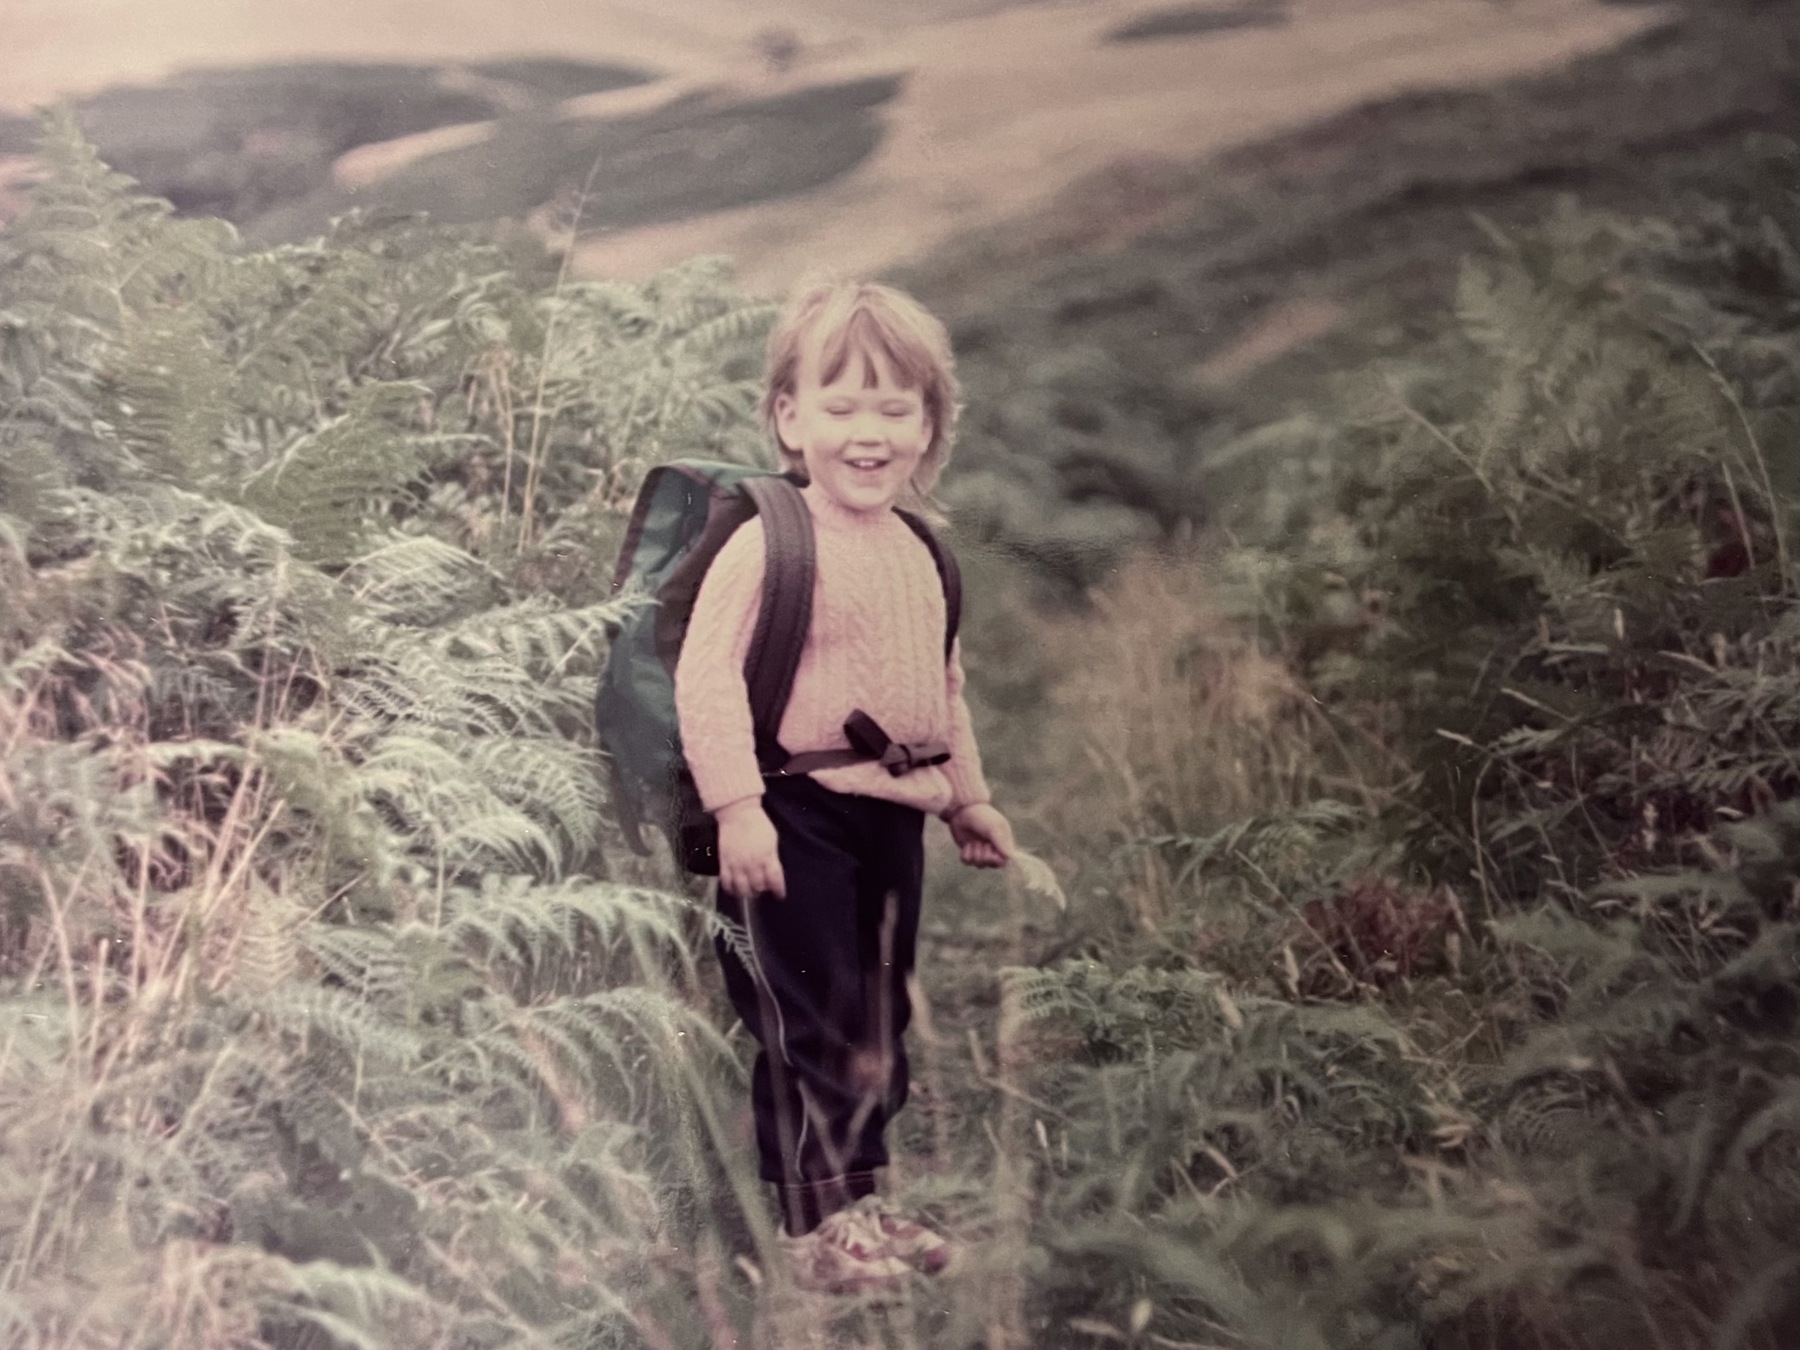 The image shows Kirsty Mack as a child, smiling with her eyes shut. She's stood in the wilderness with bushes around her, wearing a wool jumper, backpack, trousers and trainers.